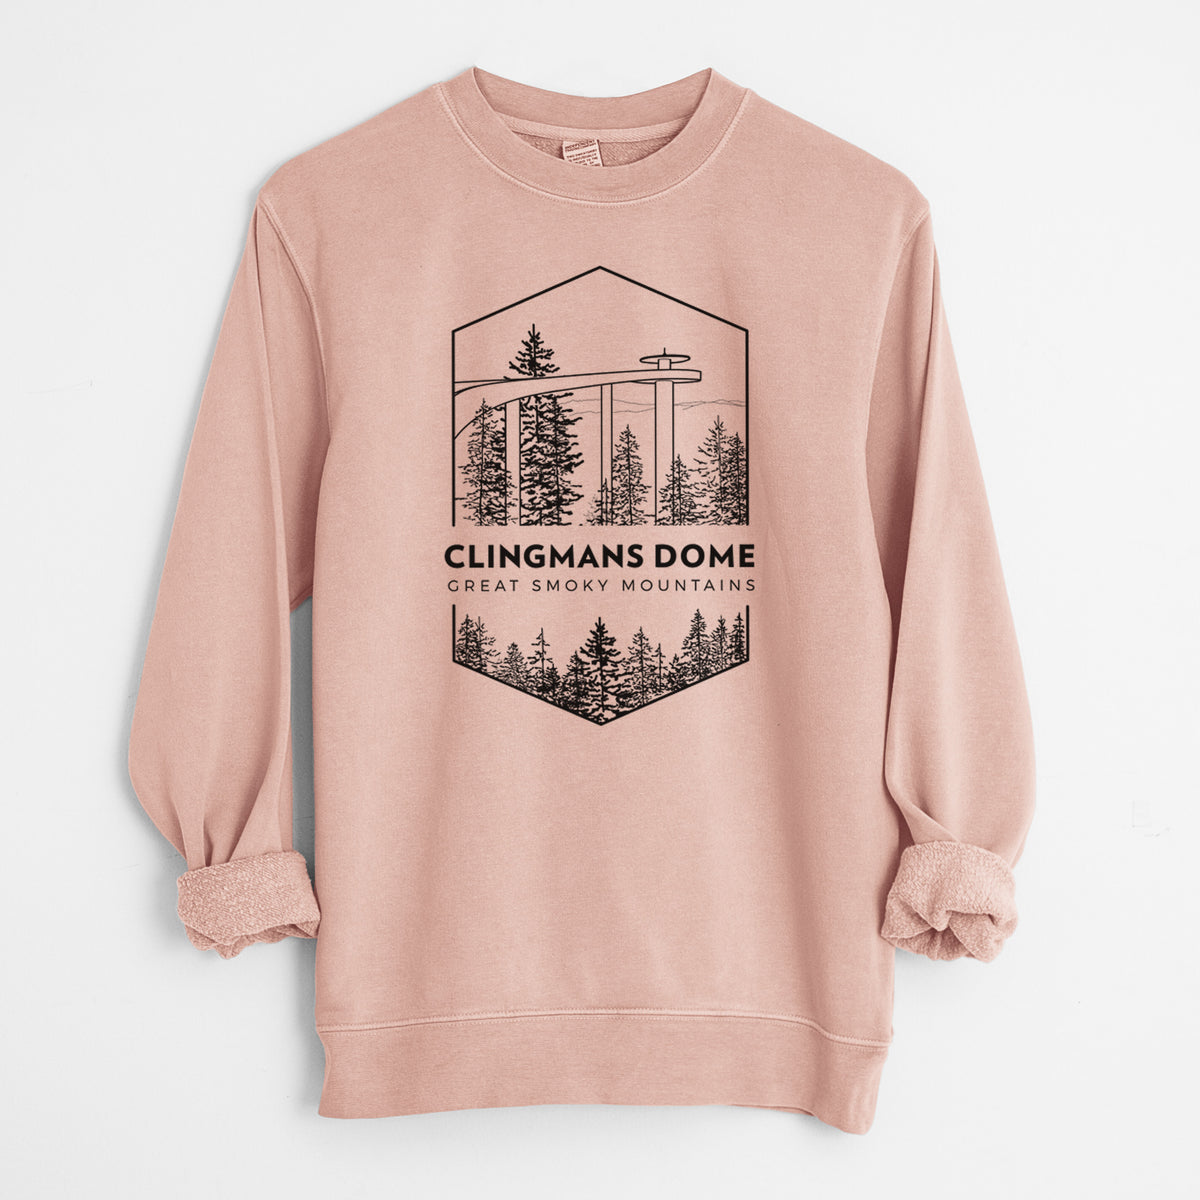 Clingmans Dome - Great Smoky Mountains National Park - Unisex Pigment Dyed Crew Sweatshirt